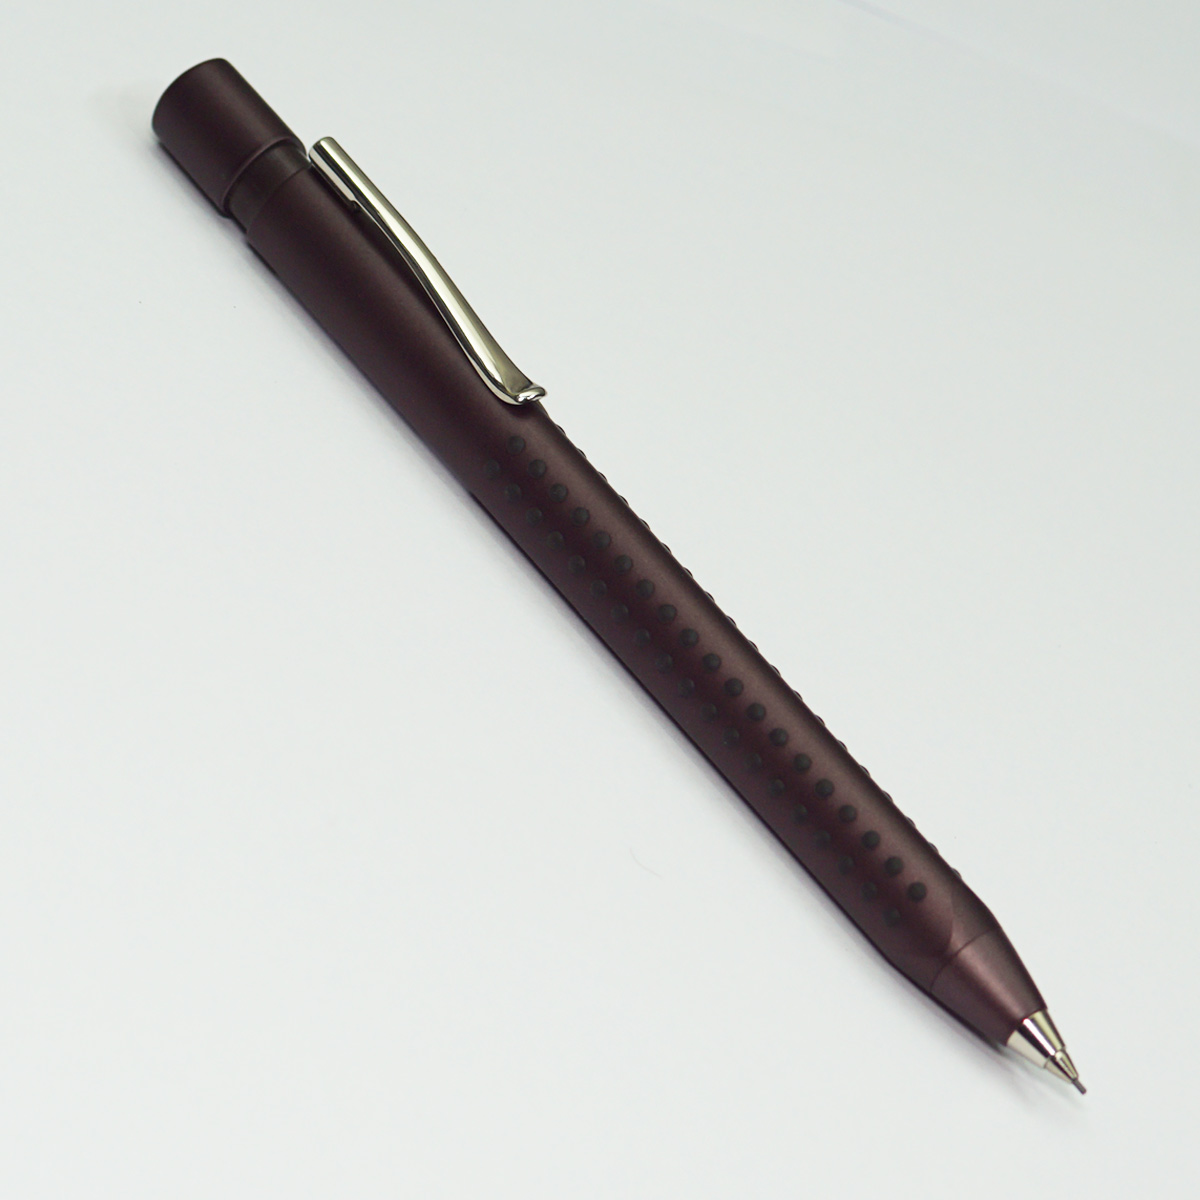 Faber Castell Frosted Brown Color Body With Silver Clip 0.7mm Tip Mechanical Pencil SKU 23031